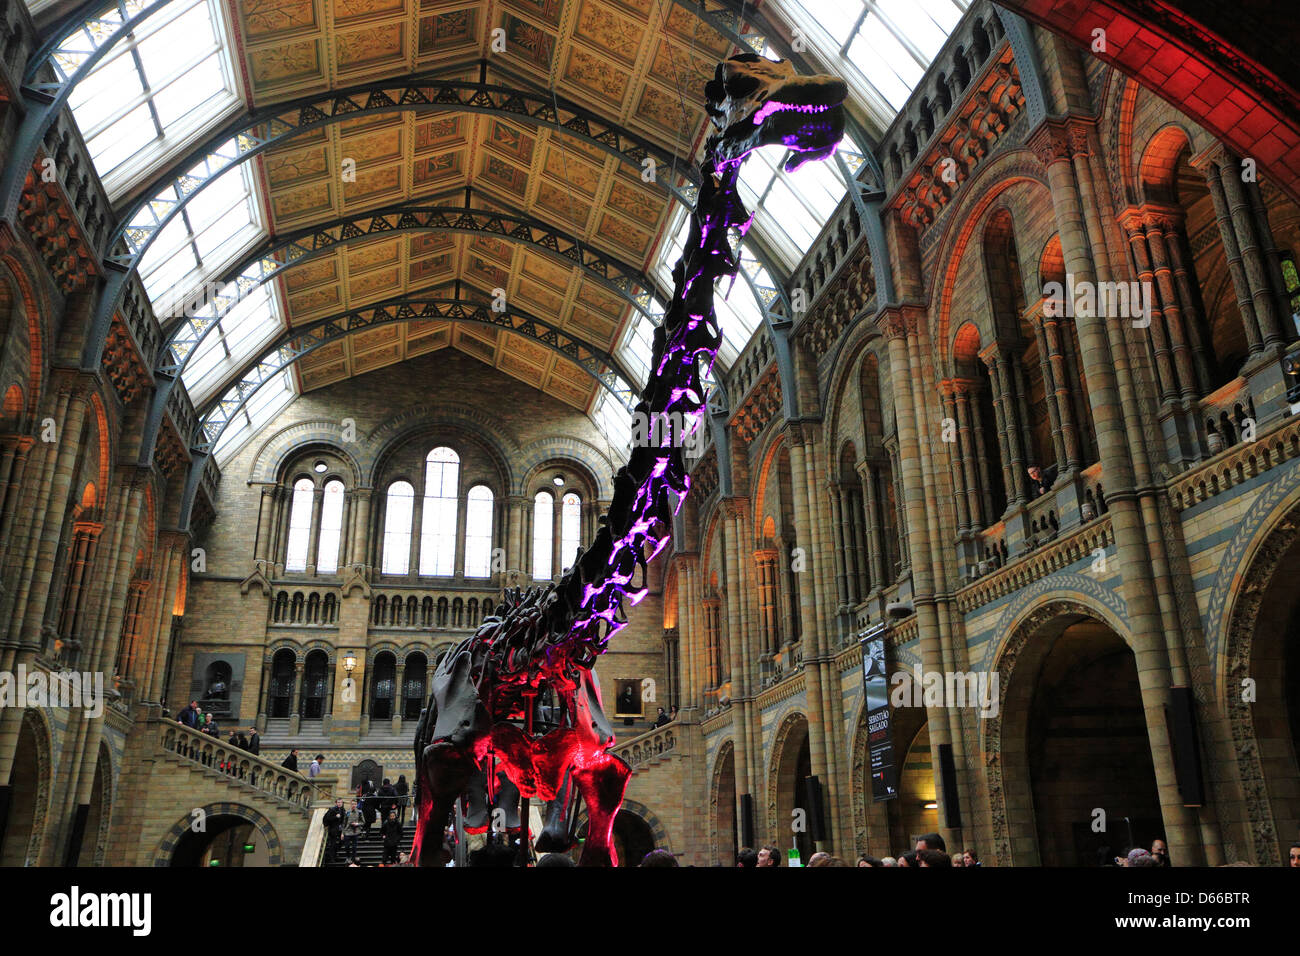 Diplodocus skeleton in central hall of Natural History museum, London, UK. Stock Photo